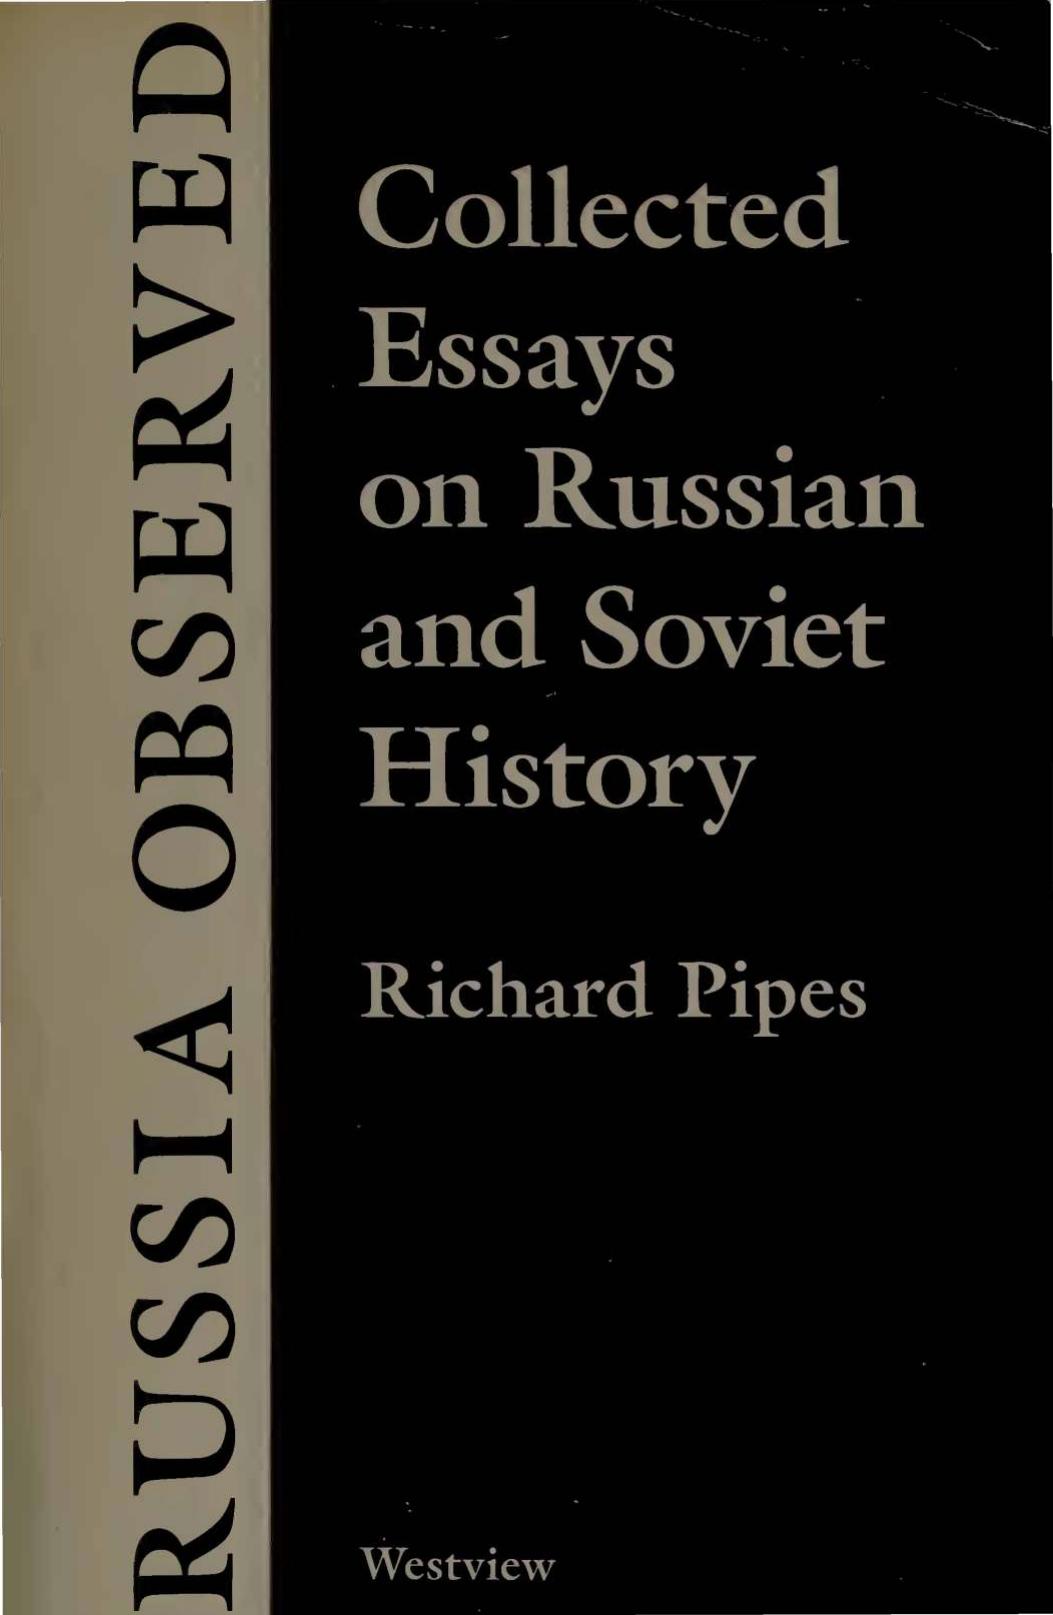 Russia Observed - Collected Essays on Russian and Soviet History by Richard Pipes